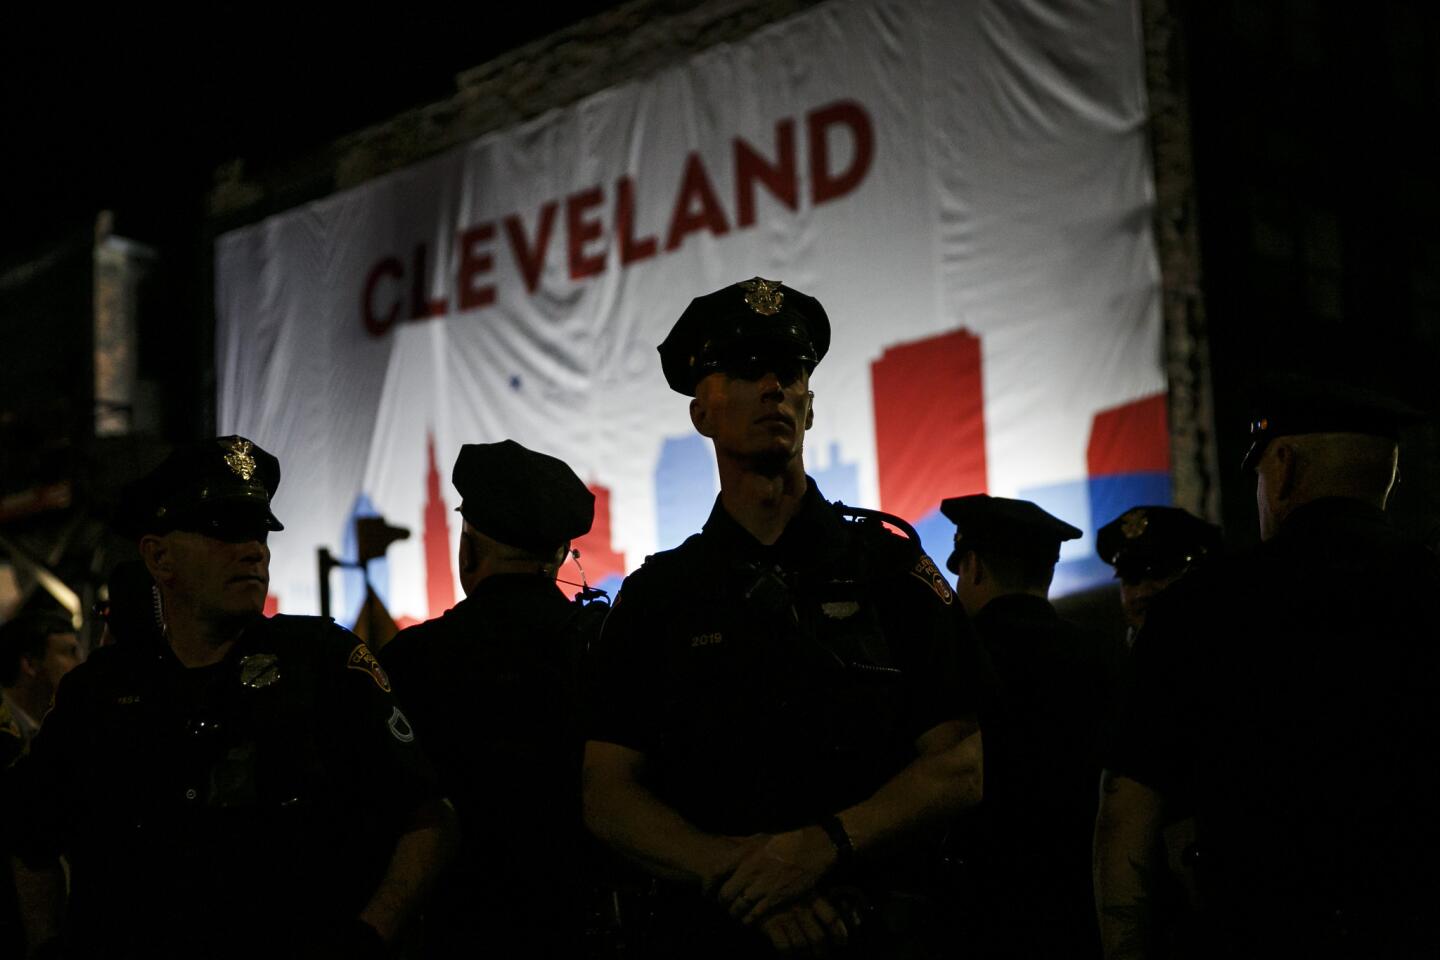 Cleveland Police Officers stand guard at the entrance to the Quick Loans Arena for the 2016 Republican National Convention in Cleveland.